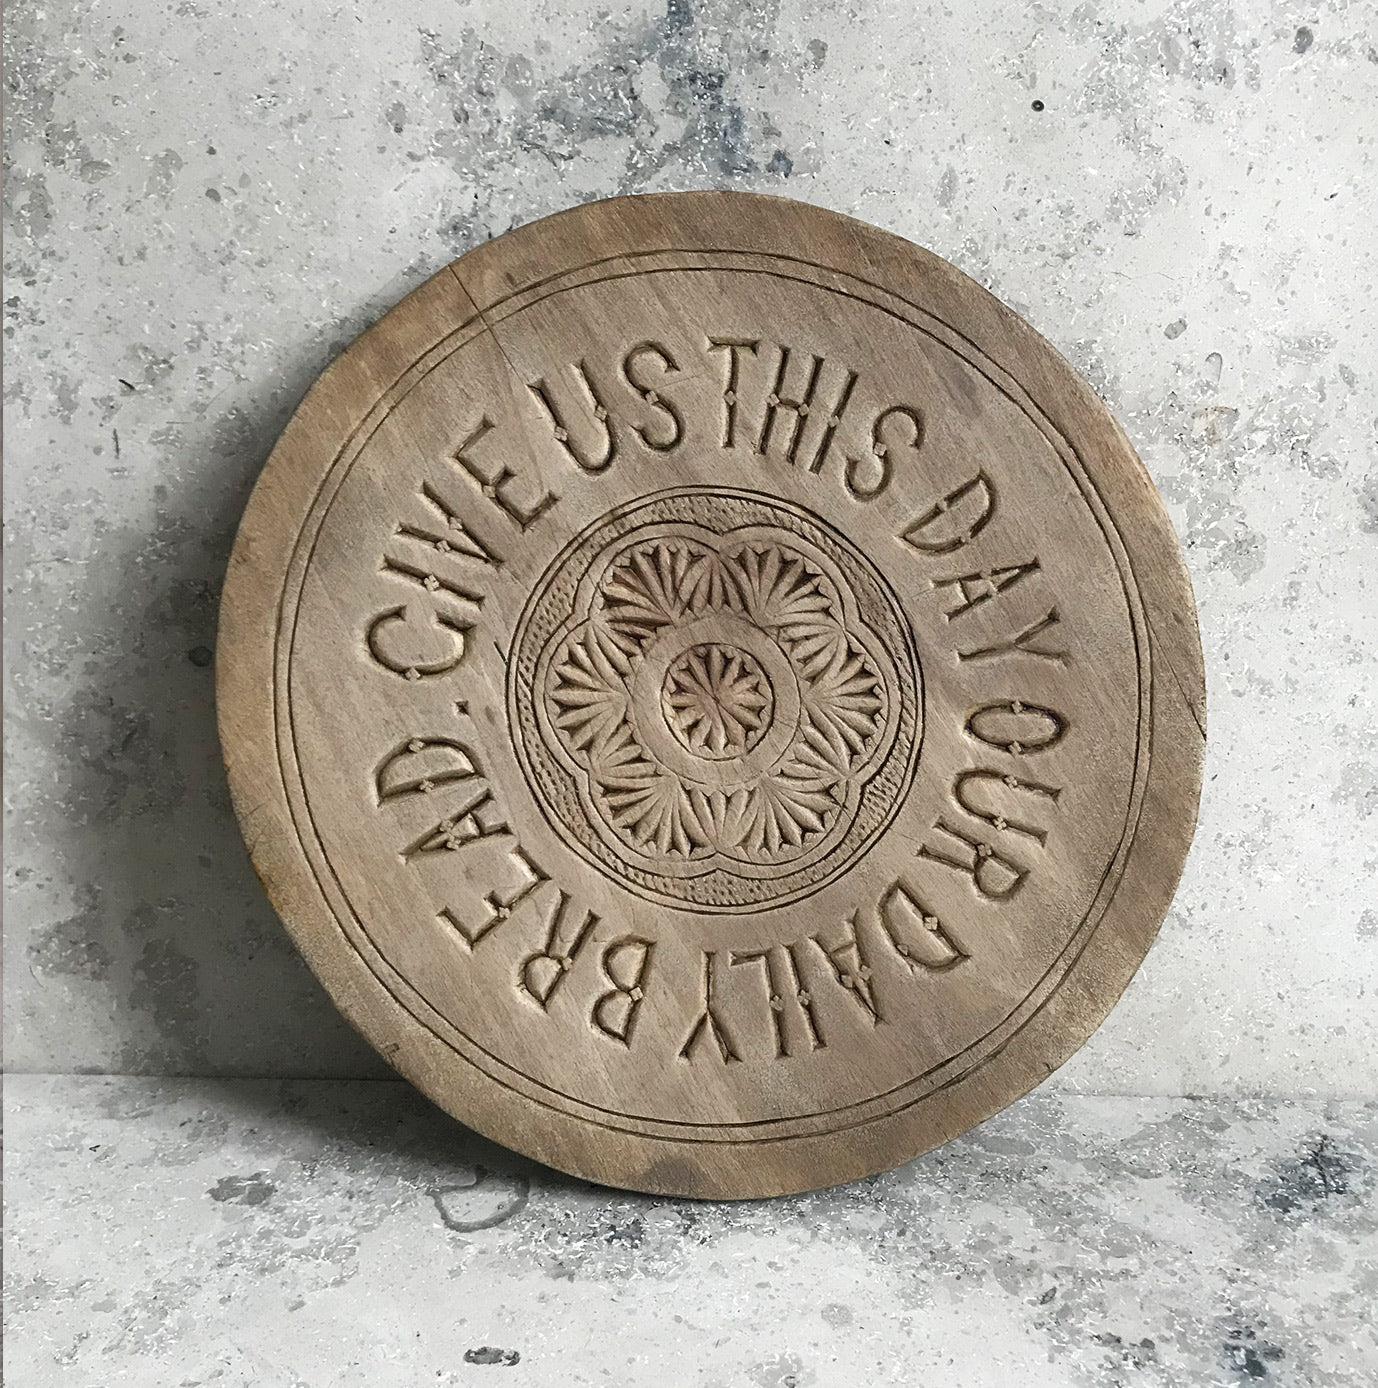 Beautiful Scottish breadboard with the Lord's Prayer, late 19th, early 20th C - SHOP NOW - www.intovintage.co.uk